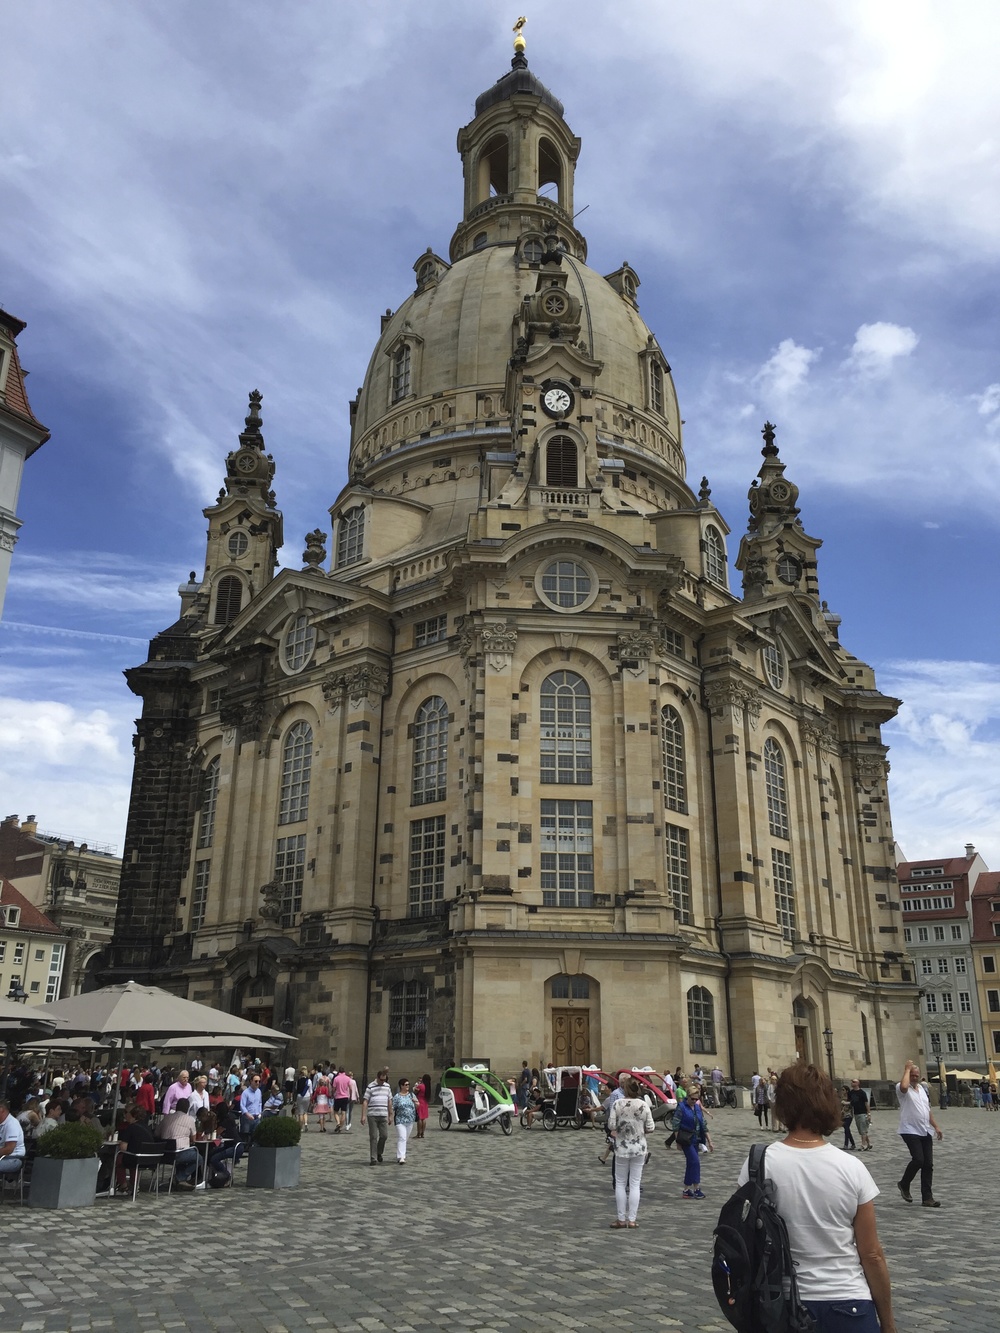 The third Frauenkirche - the first one burnt in the nineteenth century; the second was levelled by the allied bombs in 1945 and remained as rubble until this one was built in 2002